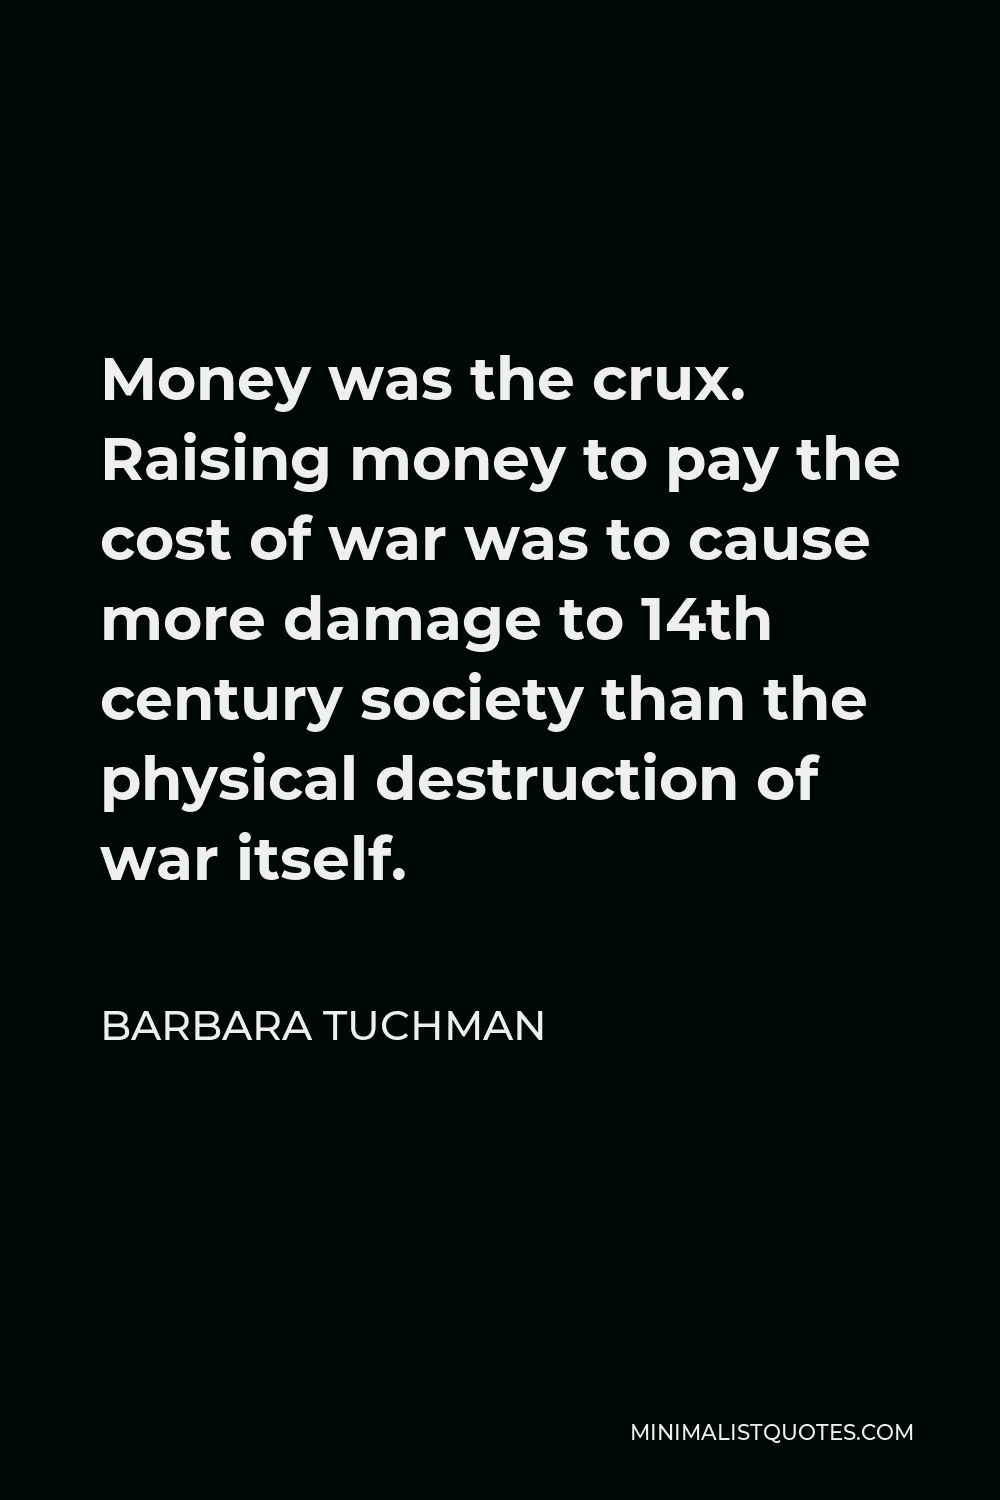 Barbara Tuchman Quote - Money was the crux. Raising money to pay the cost of war was to cause more damage to 14th century society than the physical destruction of war itself.